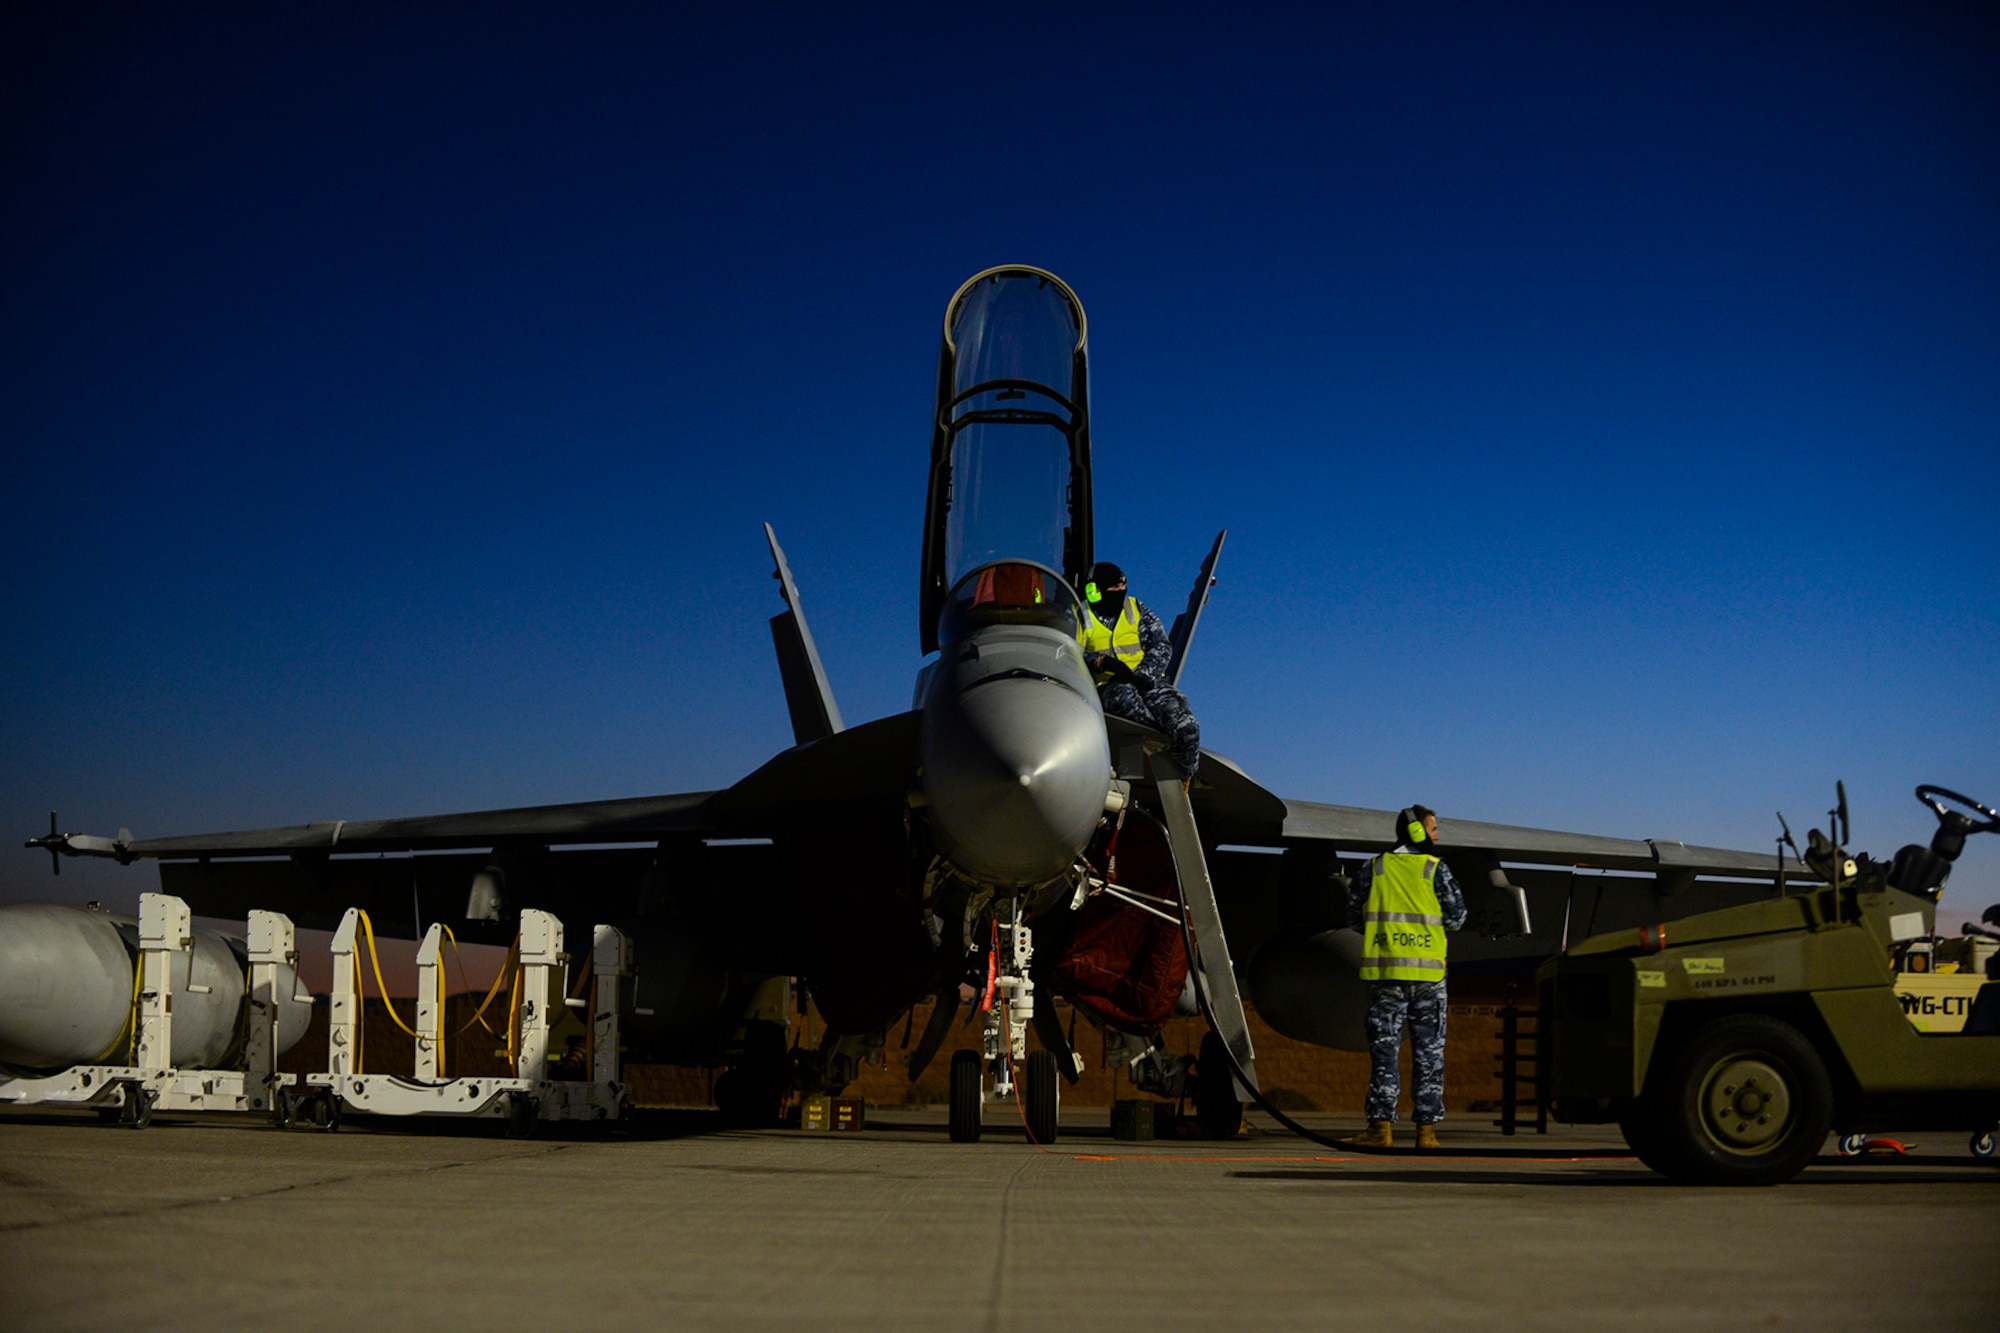 Royal Australian Air Force aircrew assigned to No. 1 Squadron, RAAF Amberley, Australia, perform routine maintenance inspections on an F/A-18 Super Hornet during Red Flag 16-1 at Nellis Air Force Base, Nev., Feb. 2, 2016. Night missions have been integrated into Red Flag to prepare aircrews for missions in low-light environment. (U.S. Air Force photo by Airman 1st Class Nathan Byrnes)